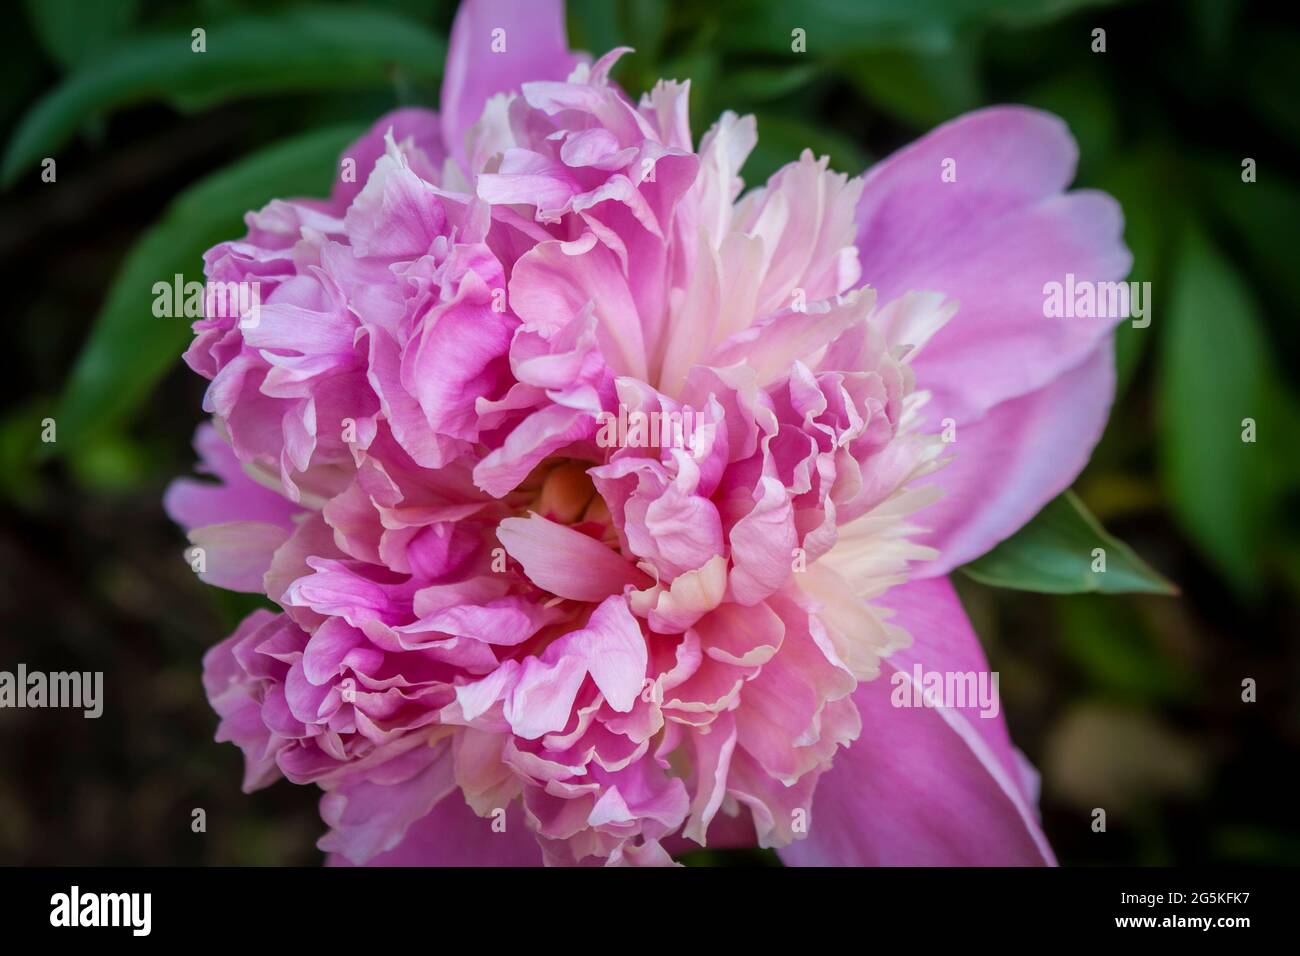 Close-up of large shabby pink Peony  against blurred green garden background. Stock Photo